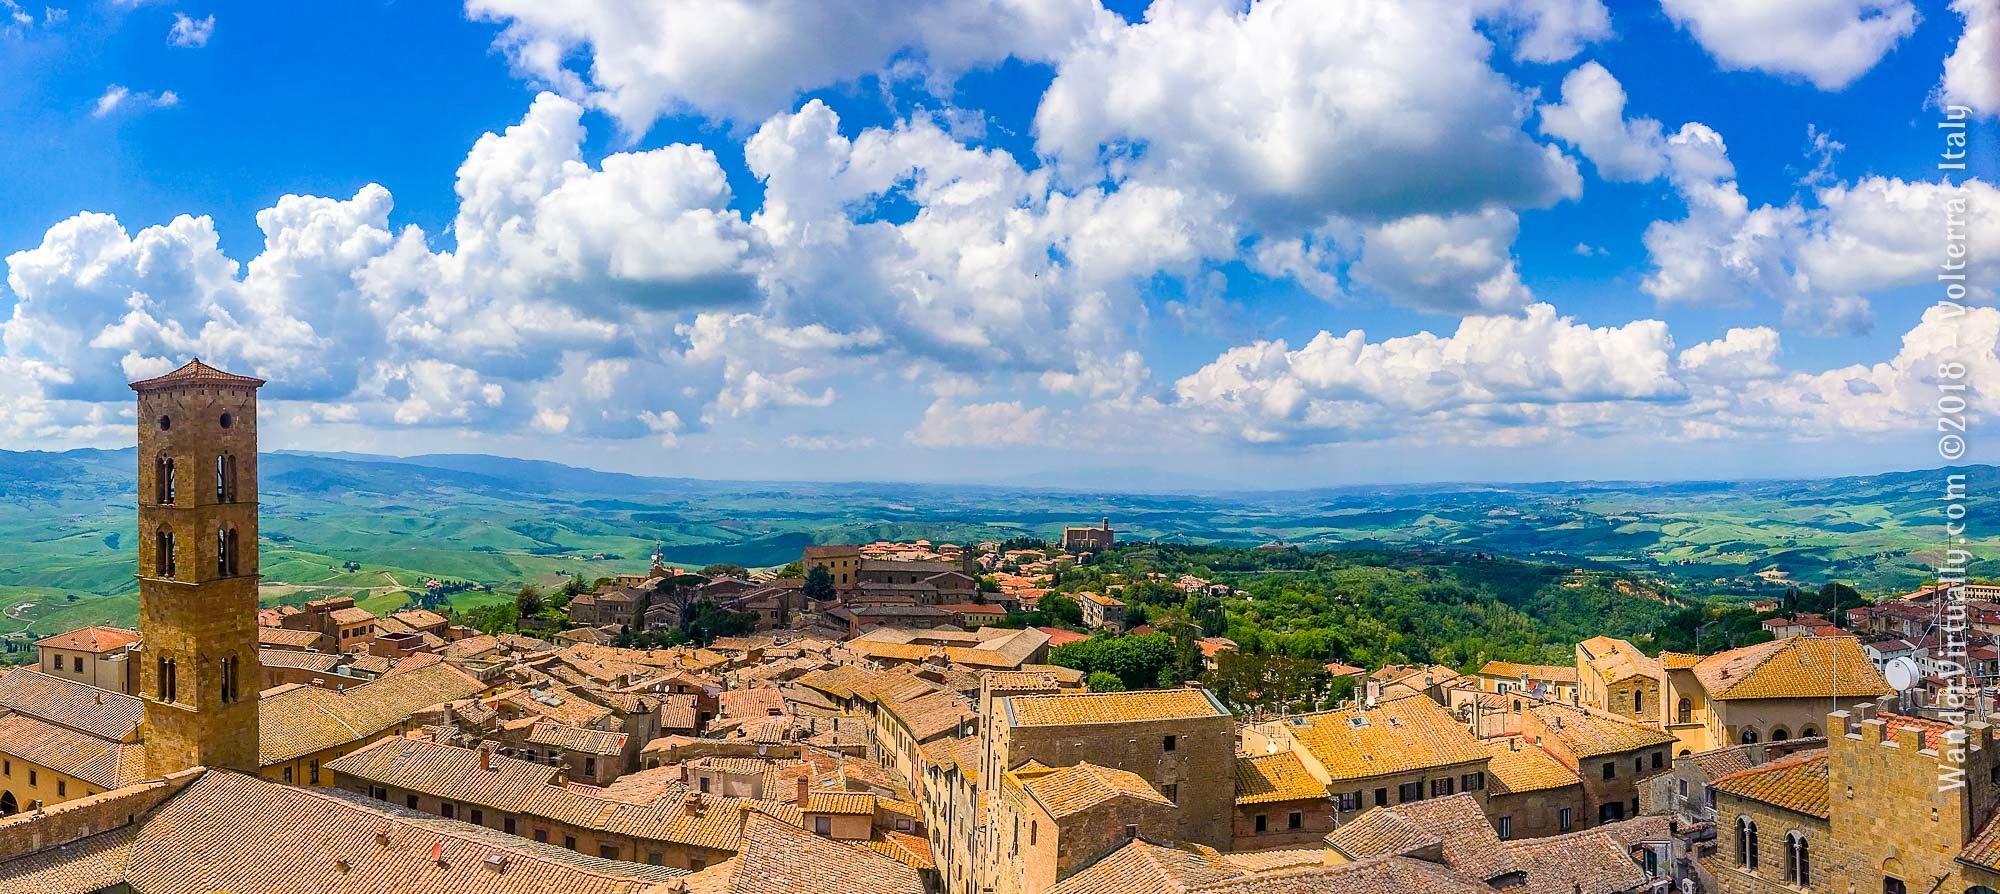 City of Volterra - view from the tower of the Palazzo dei Priori. A DNA study from 2013 concludes that native Volterrans descended from ancient Etruscans.